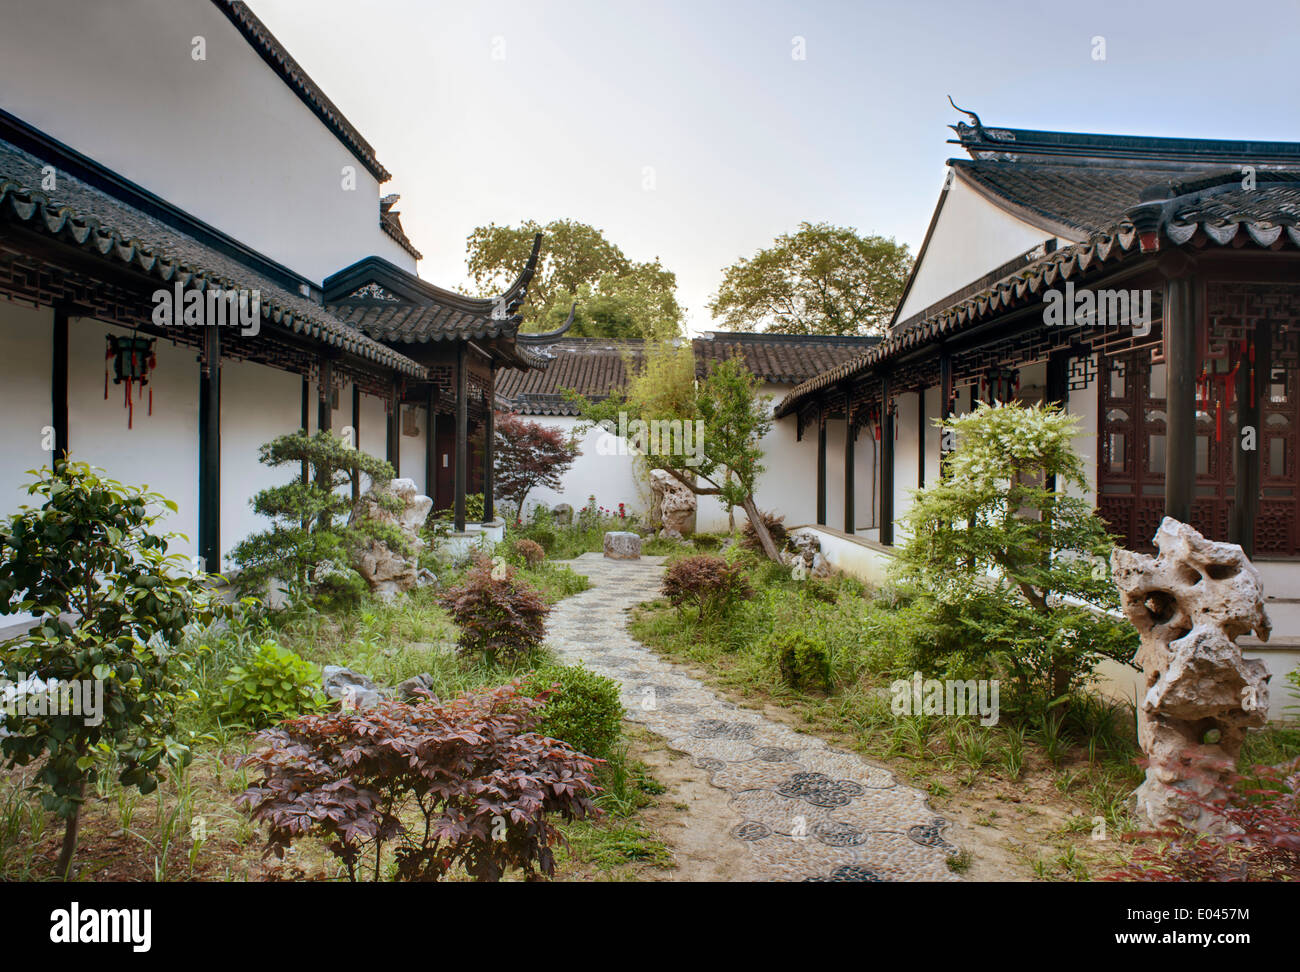 Courtyard garden of the old Suzhou Museum, a former palace. Stock Photo